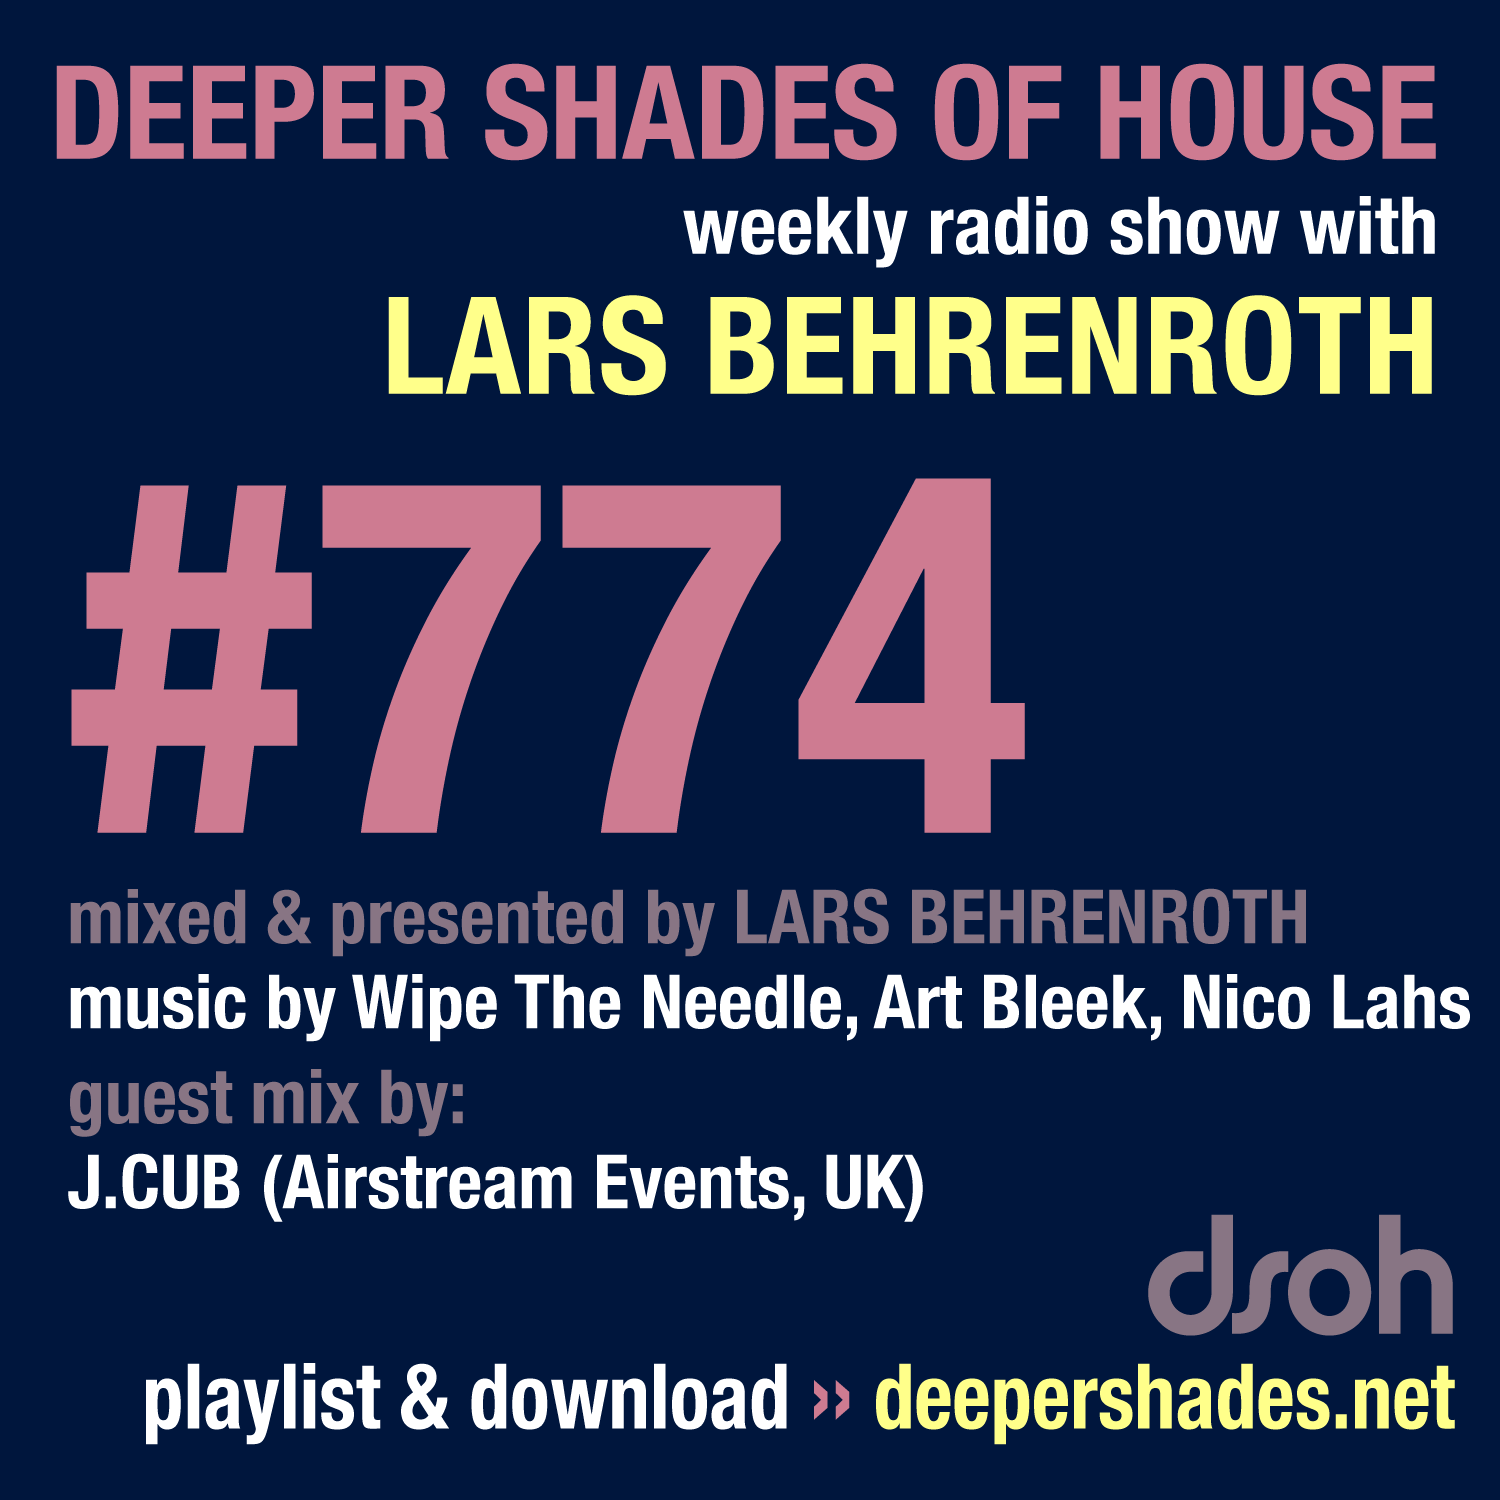 Deeper Shades Of House 774